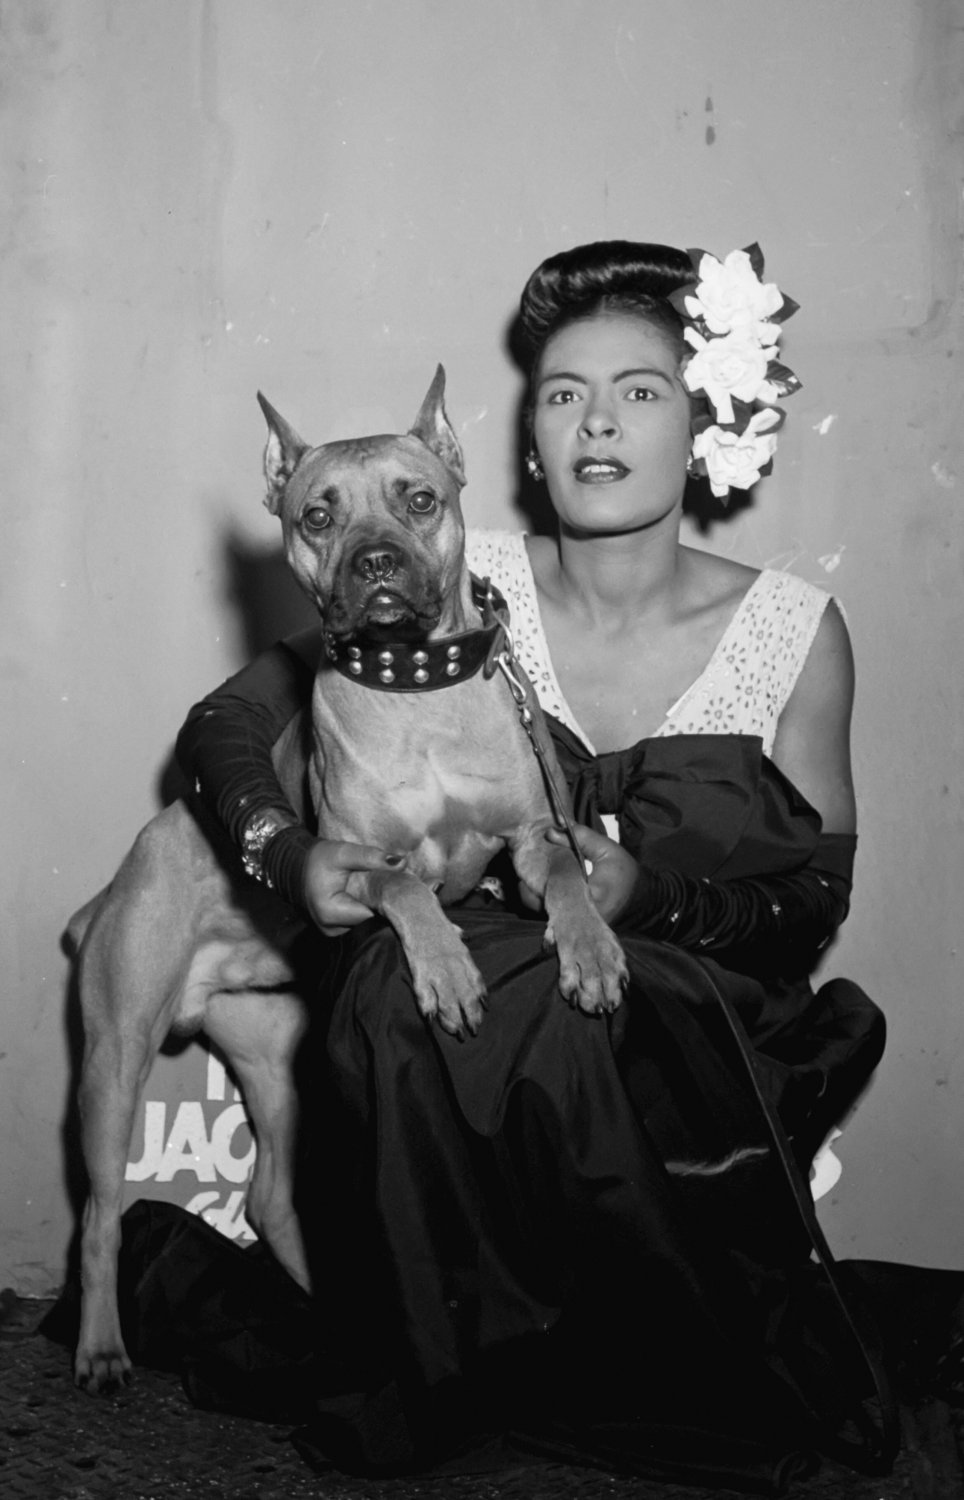 Billie Holiday   13"x19" (32cm/49cm) Polyester Fabric Poster